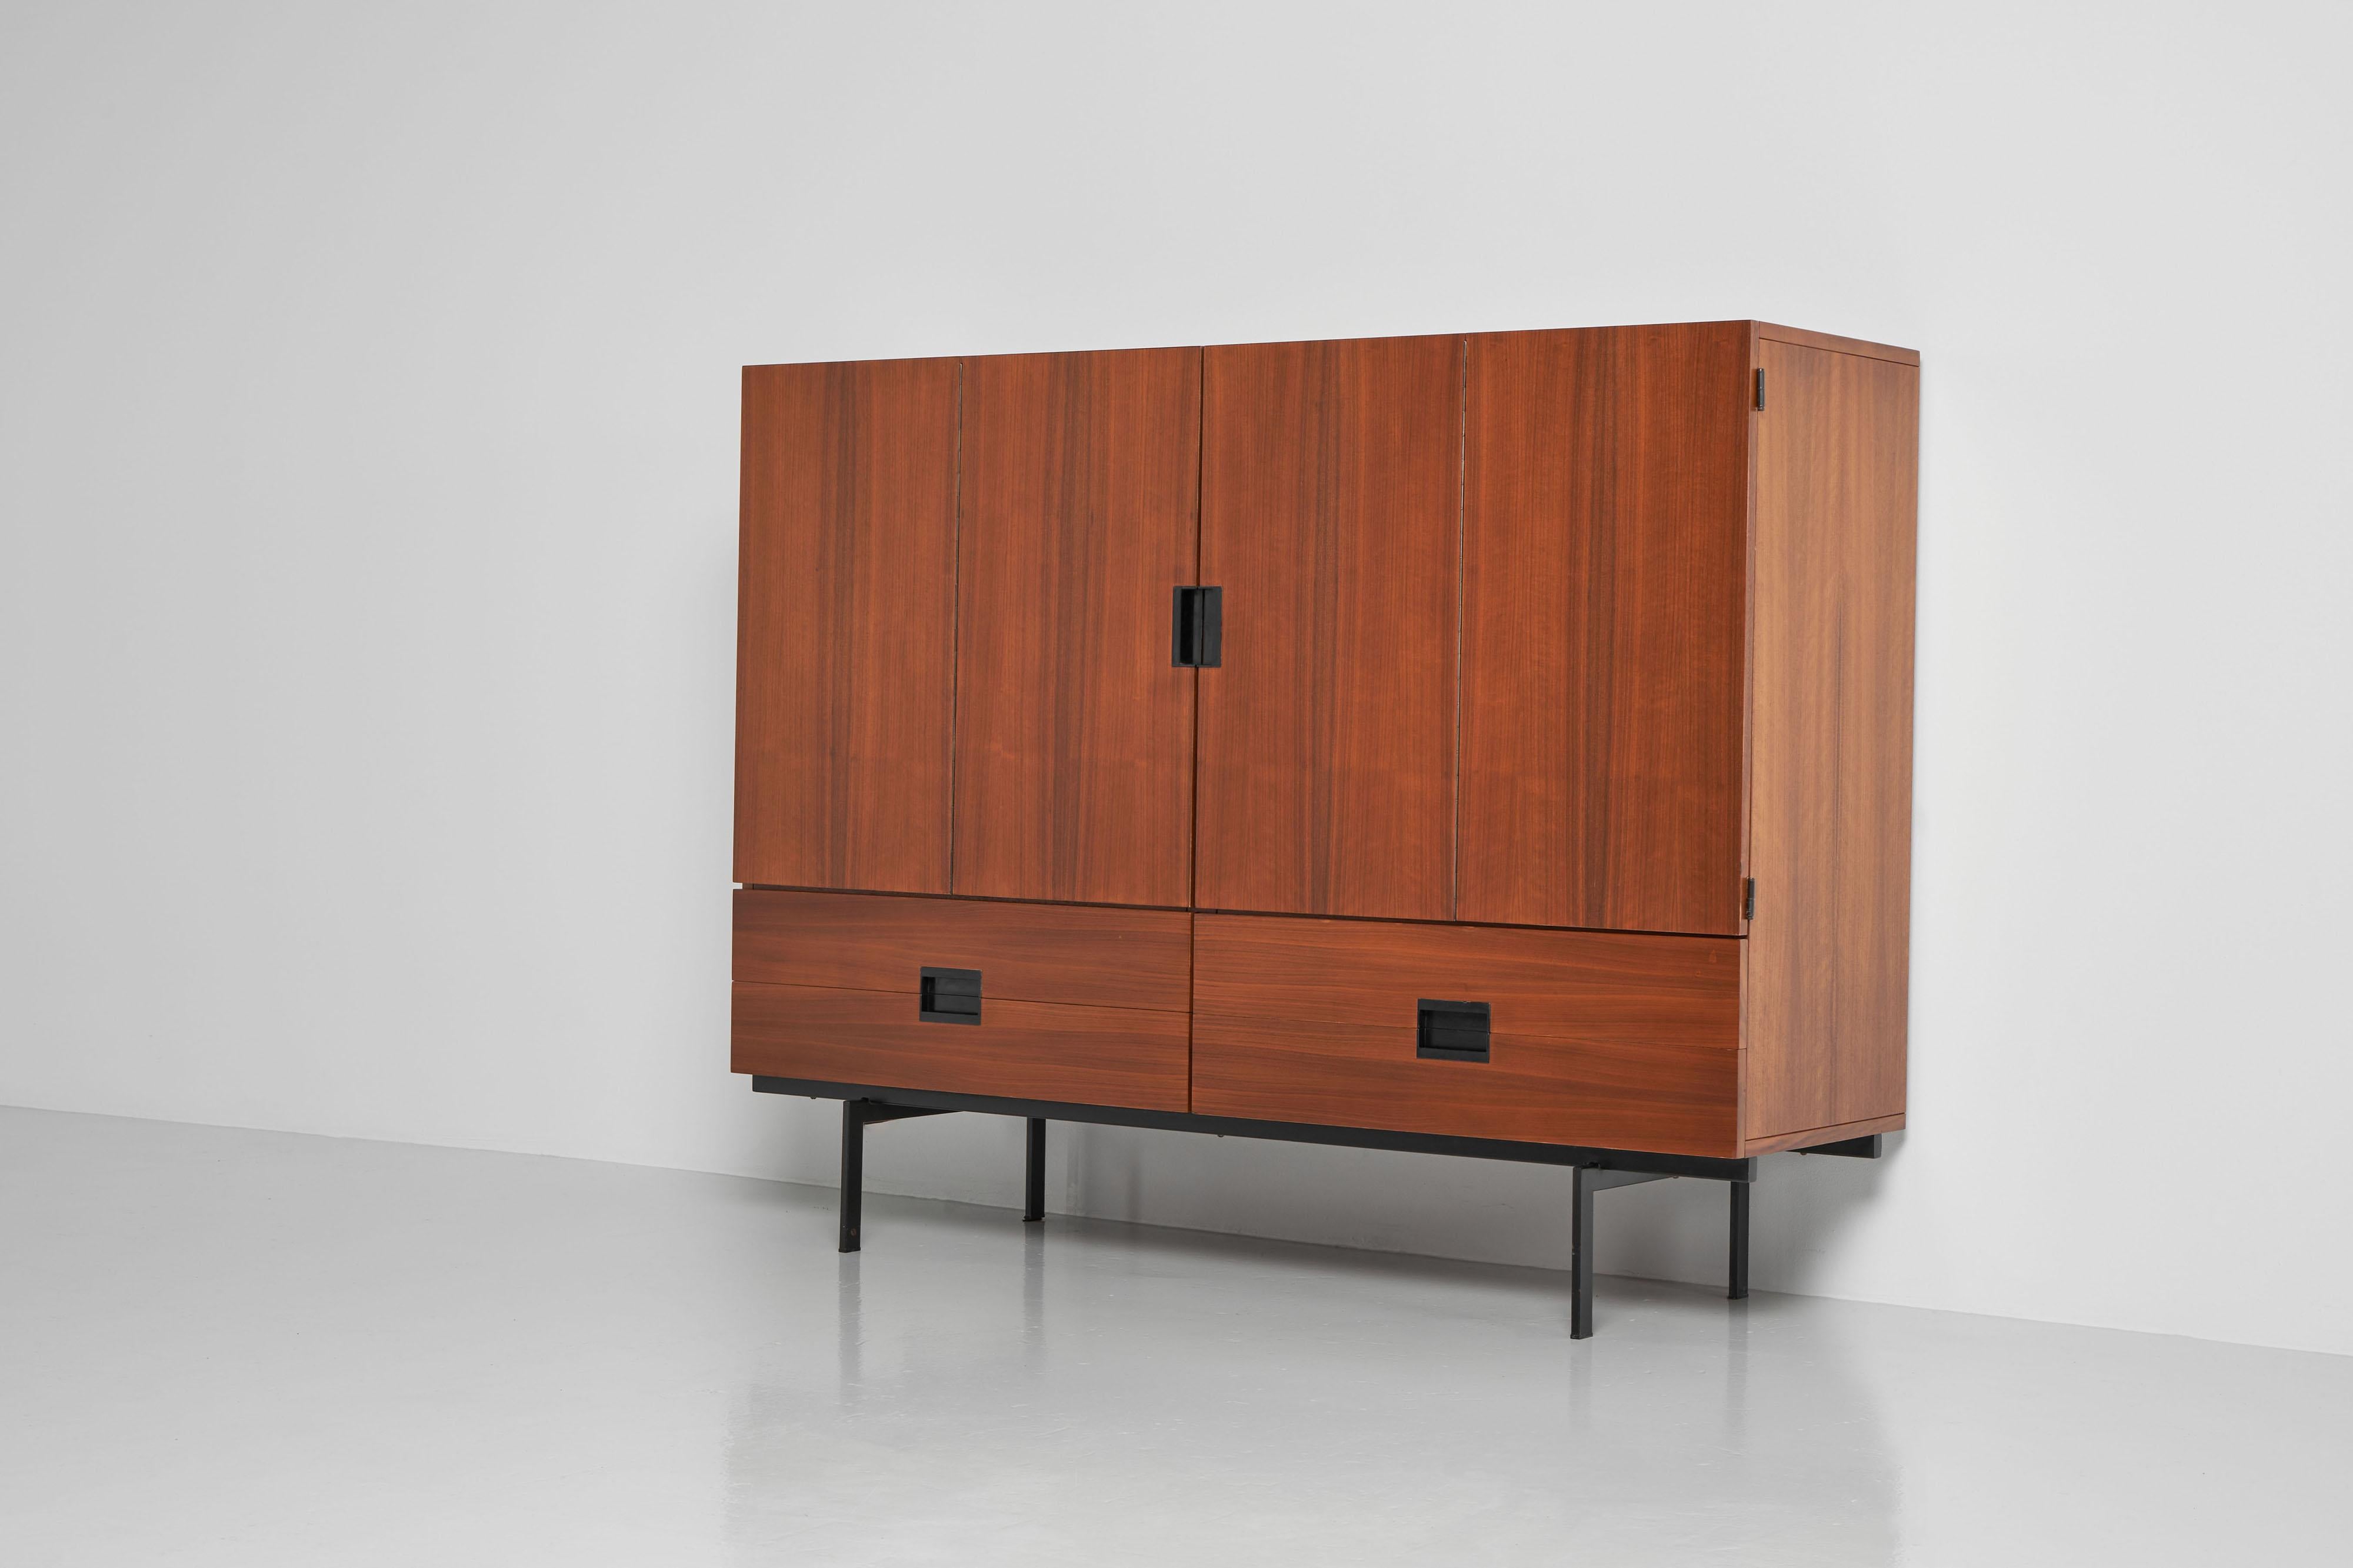 his is for a minimalist model CU04 cabinet designed by Cees Braakman and manufactured by Pastoe UMS, The Netherlands 1958. This high cabinet is made of rare and only made to order walnut wooden veneer and has a black painted metal frame. I have only